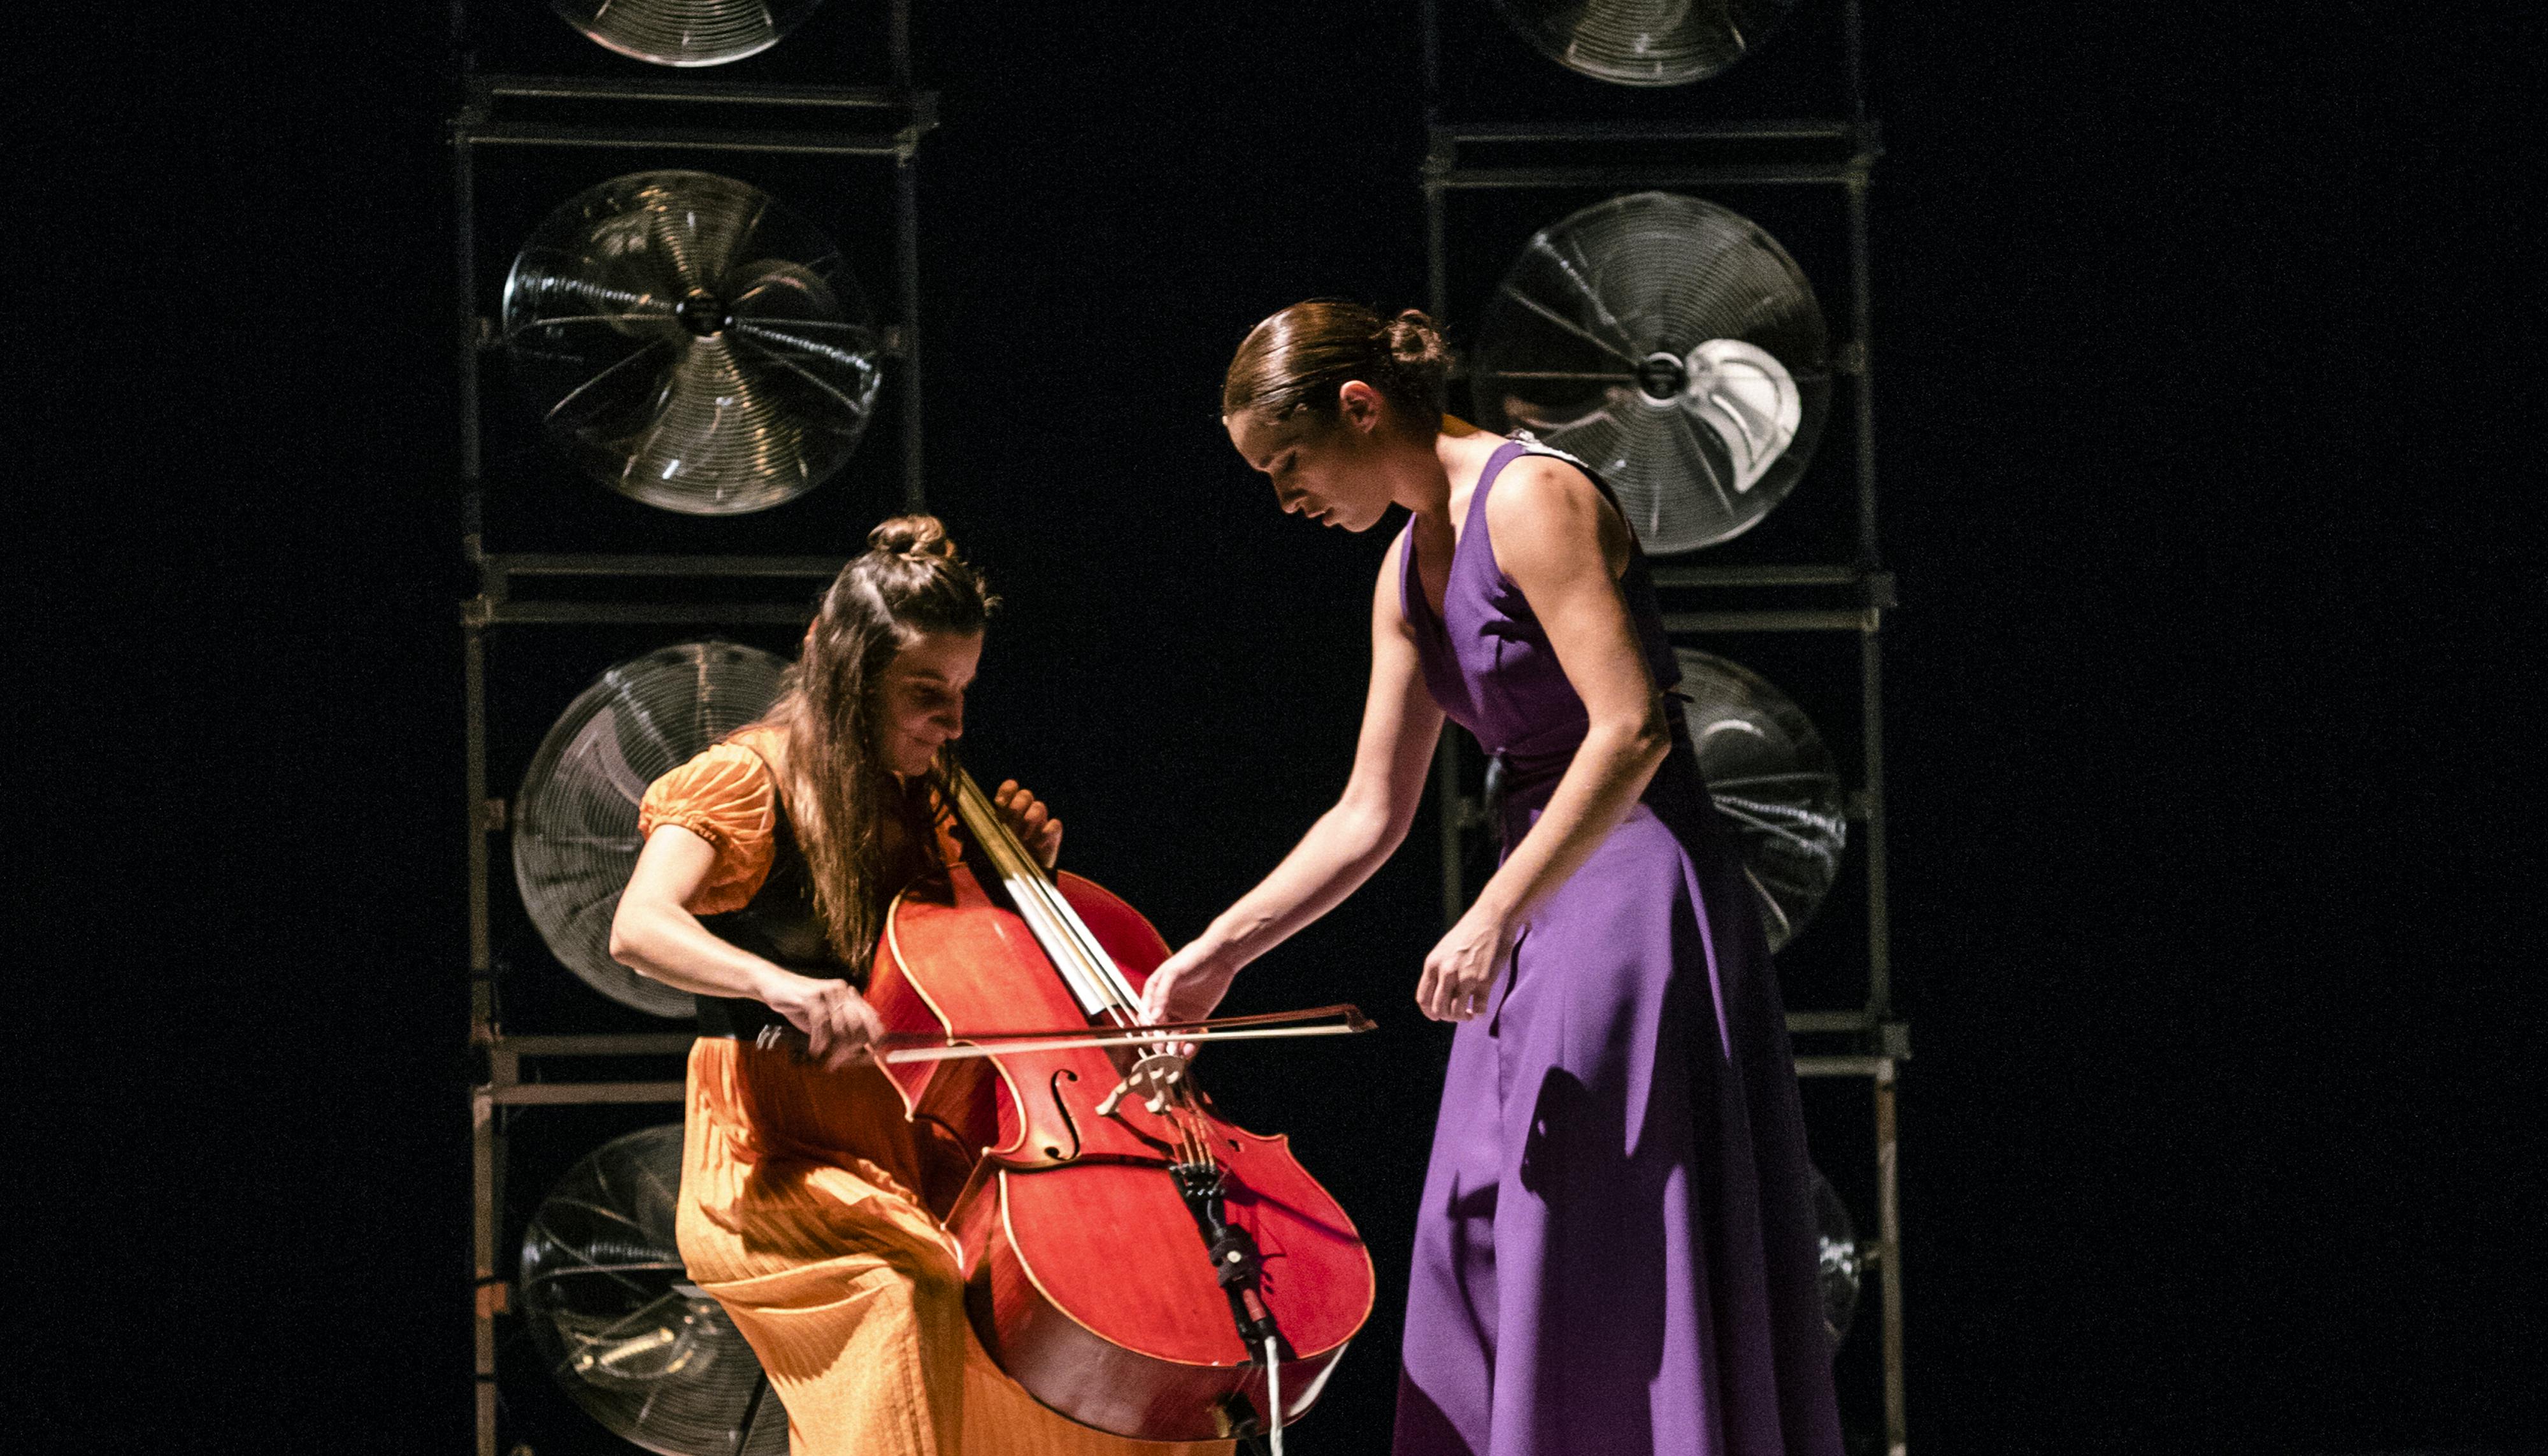 Two performers on stage. One of them, standing, wearing a long purple dress, bends over the cello of the second one, in a long orange dress, who is playing it.